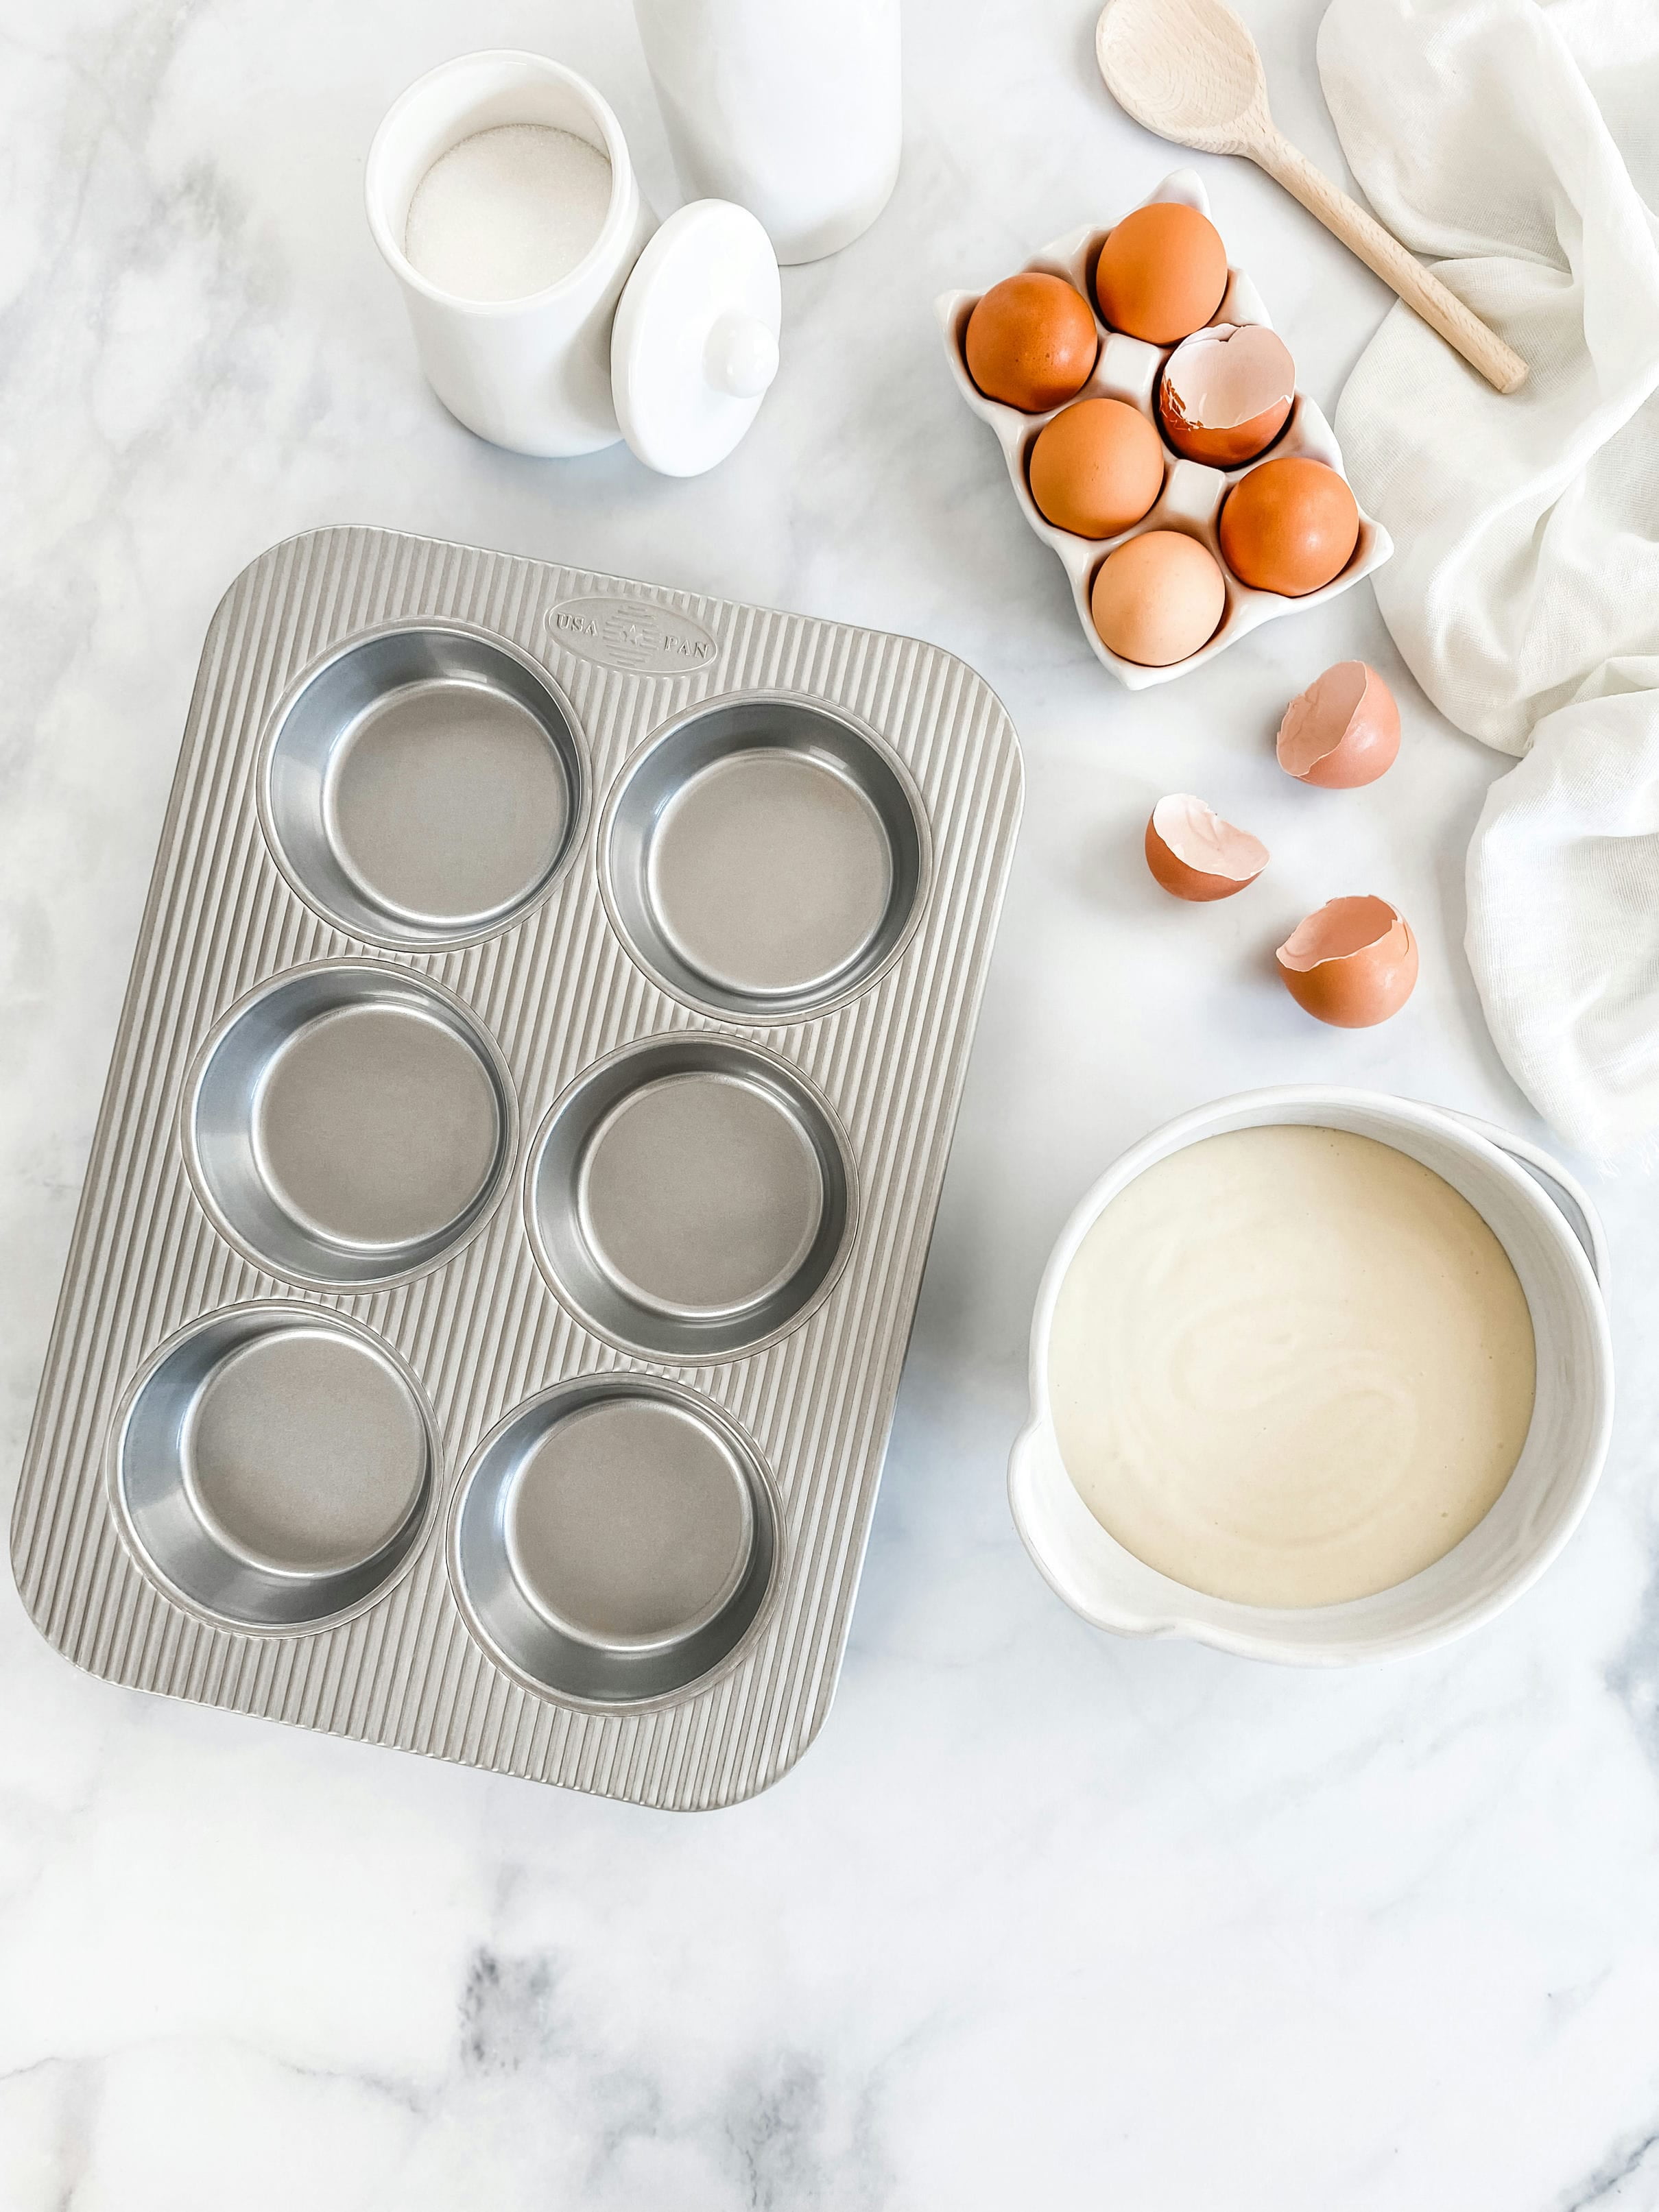 USA Pan Mini Round Cake and Cinnamon Roll Pan, 6 Well, Nonstick & Quick  Release Coating, Made in the USA from Aluminized Steel, 15-3/4 by 11